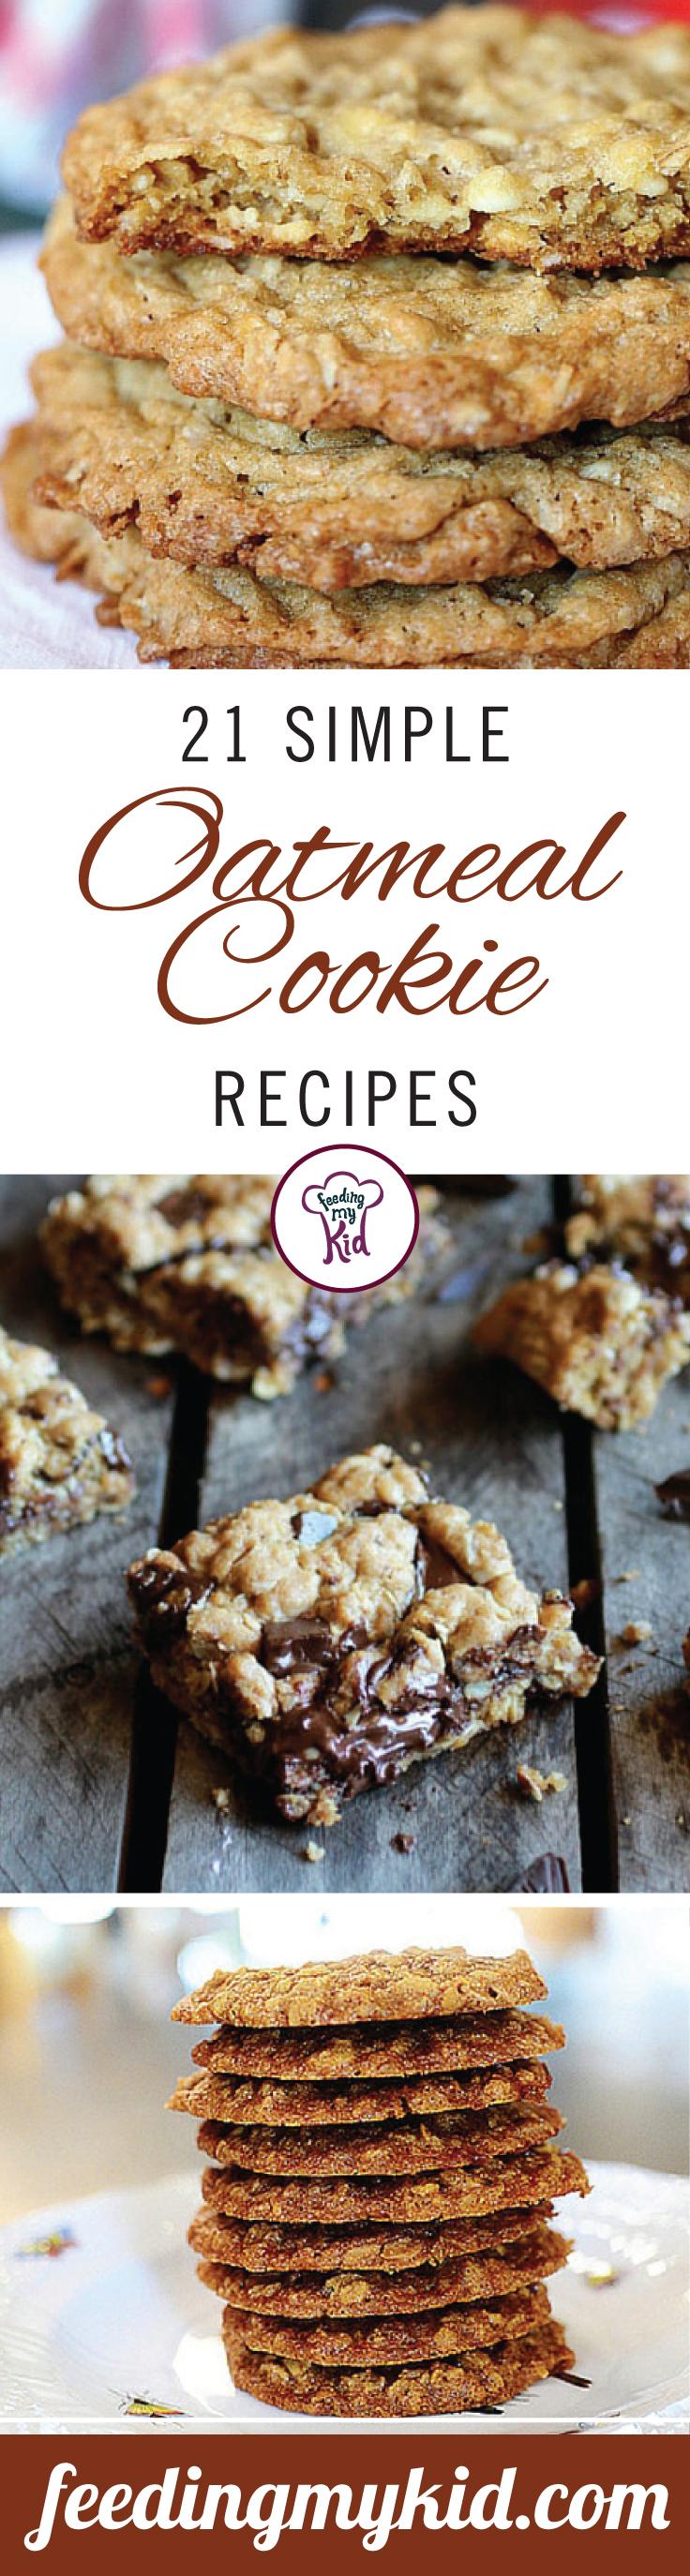 21 Simple Oatmeal Cookie Recipes - These recipes were handpicked. From strawberry cookies to peanut butter oatmeal cookies; these are the perfect treats to bring to a party or just to make at home as a dessert after dinner. Give them a go!